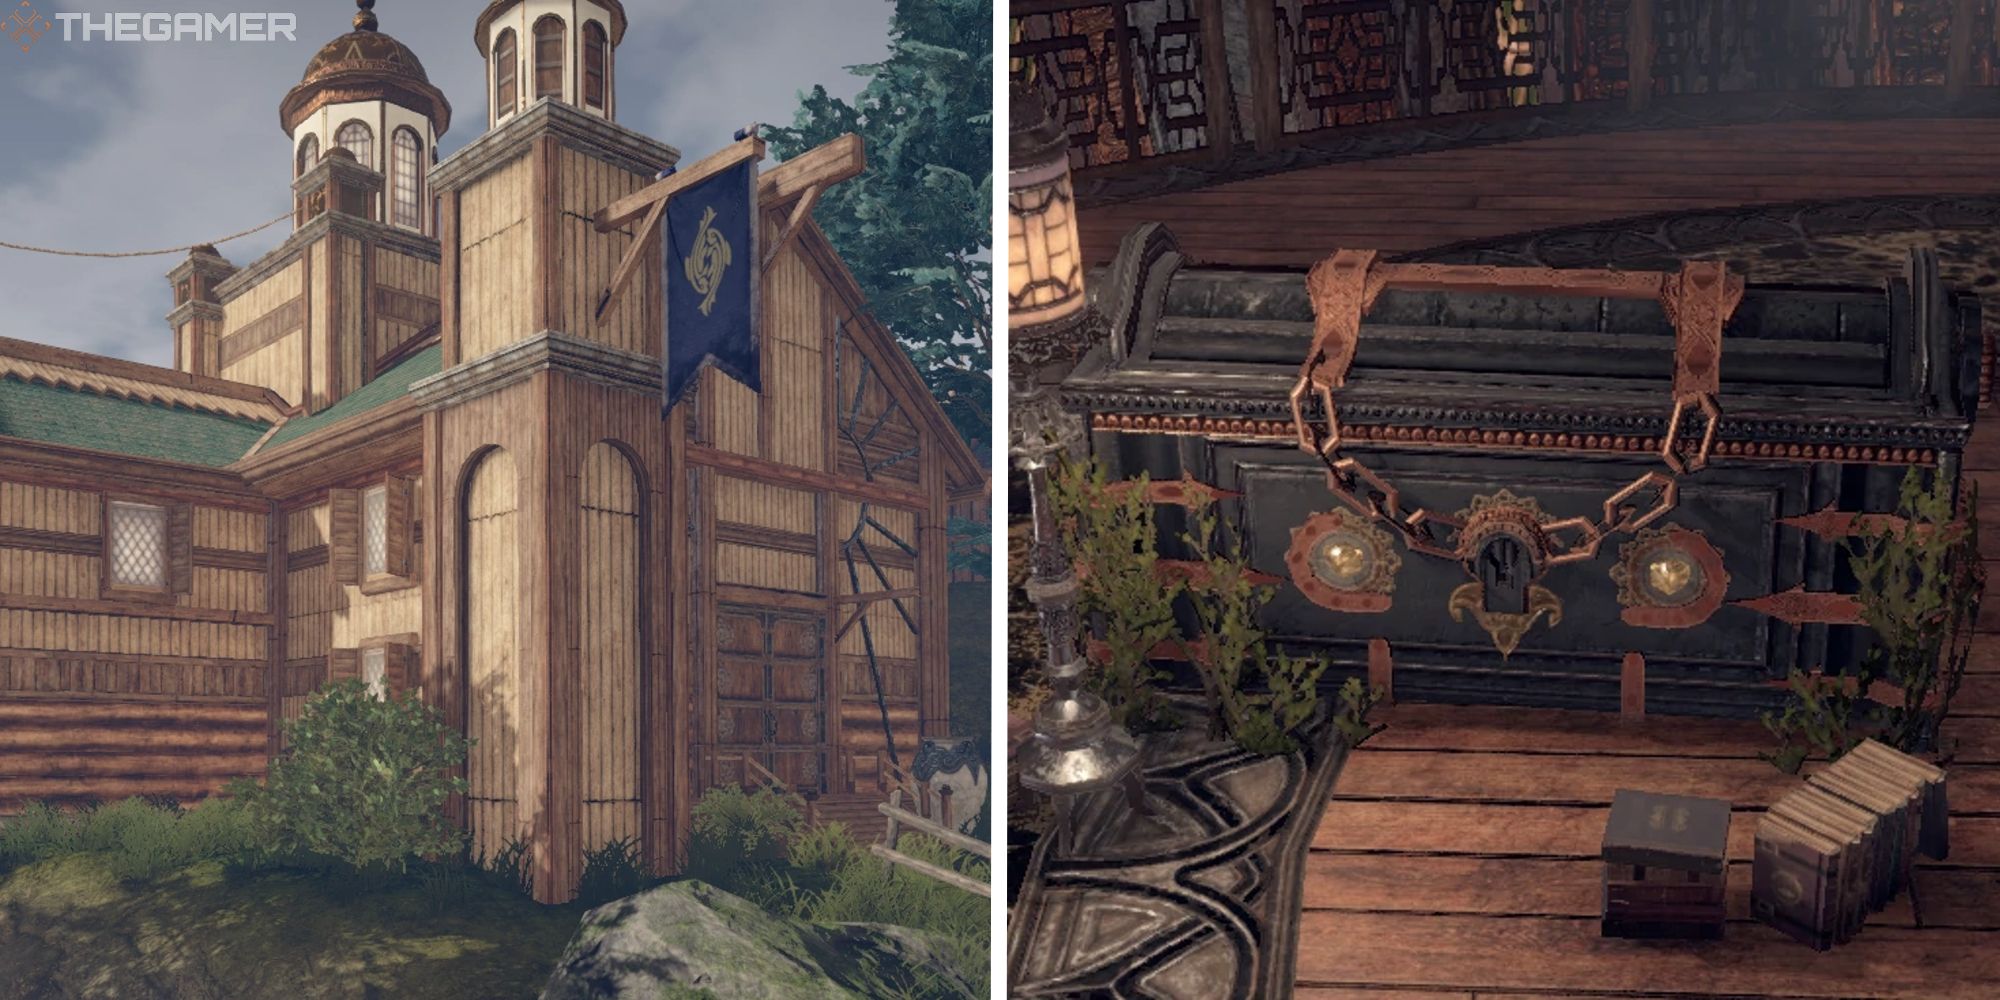 image of cierzo town hall next to image of legacy chest